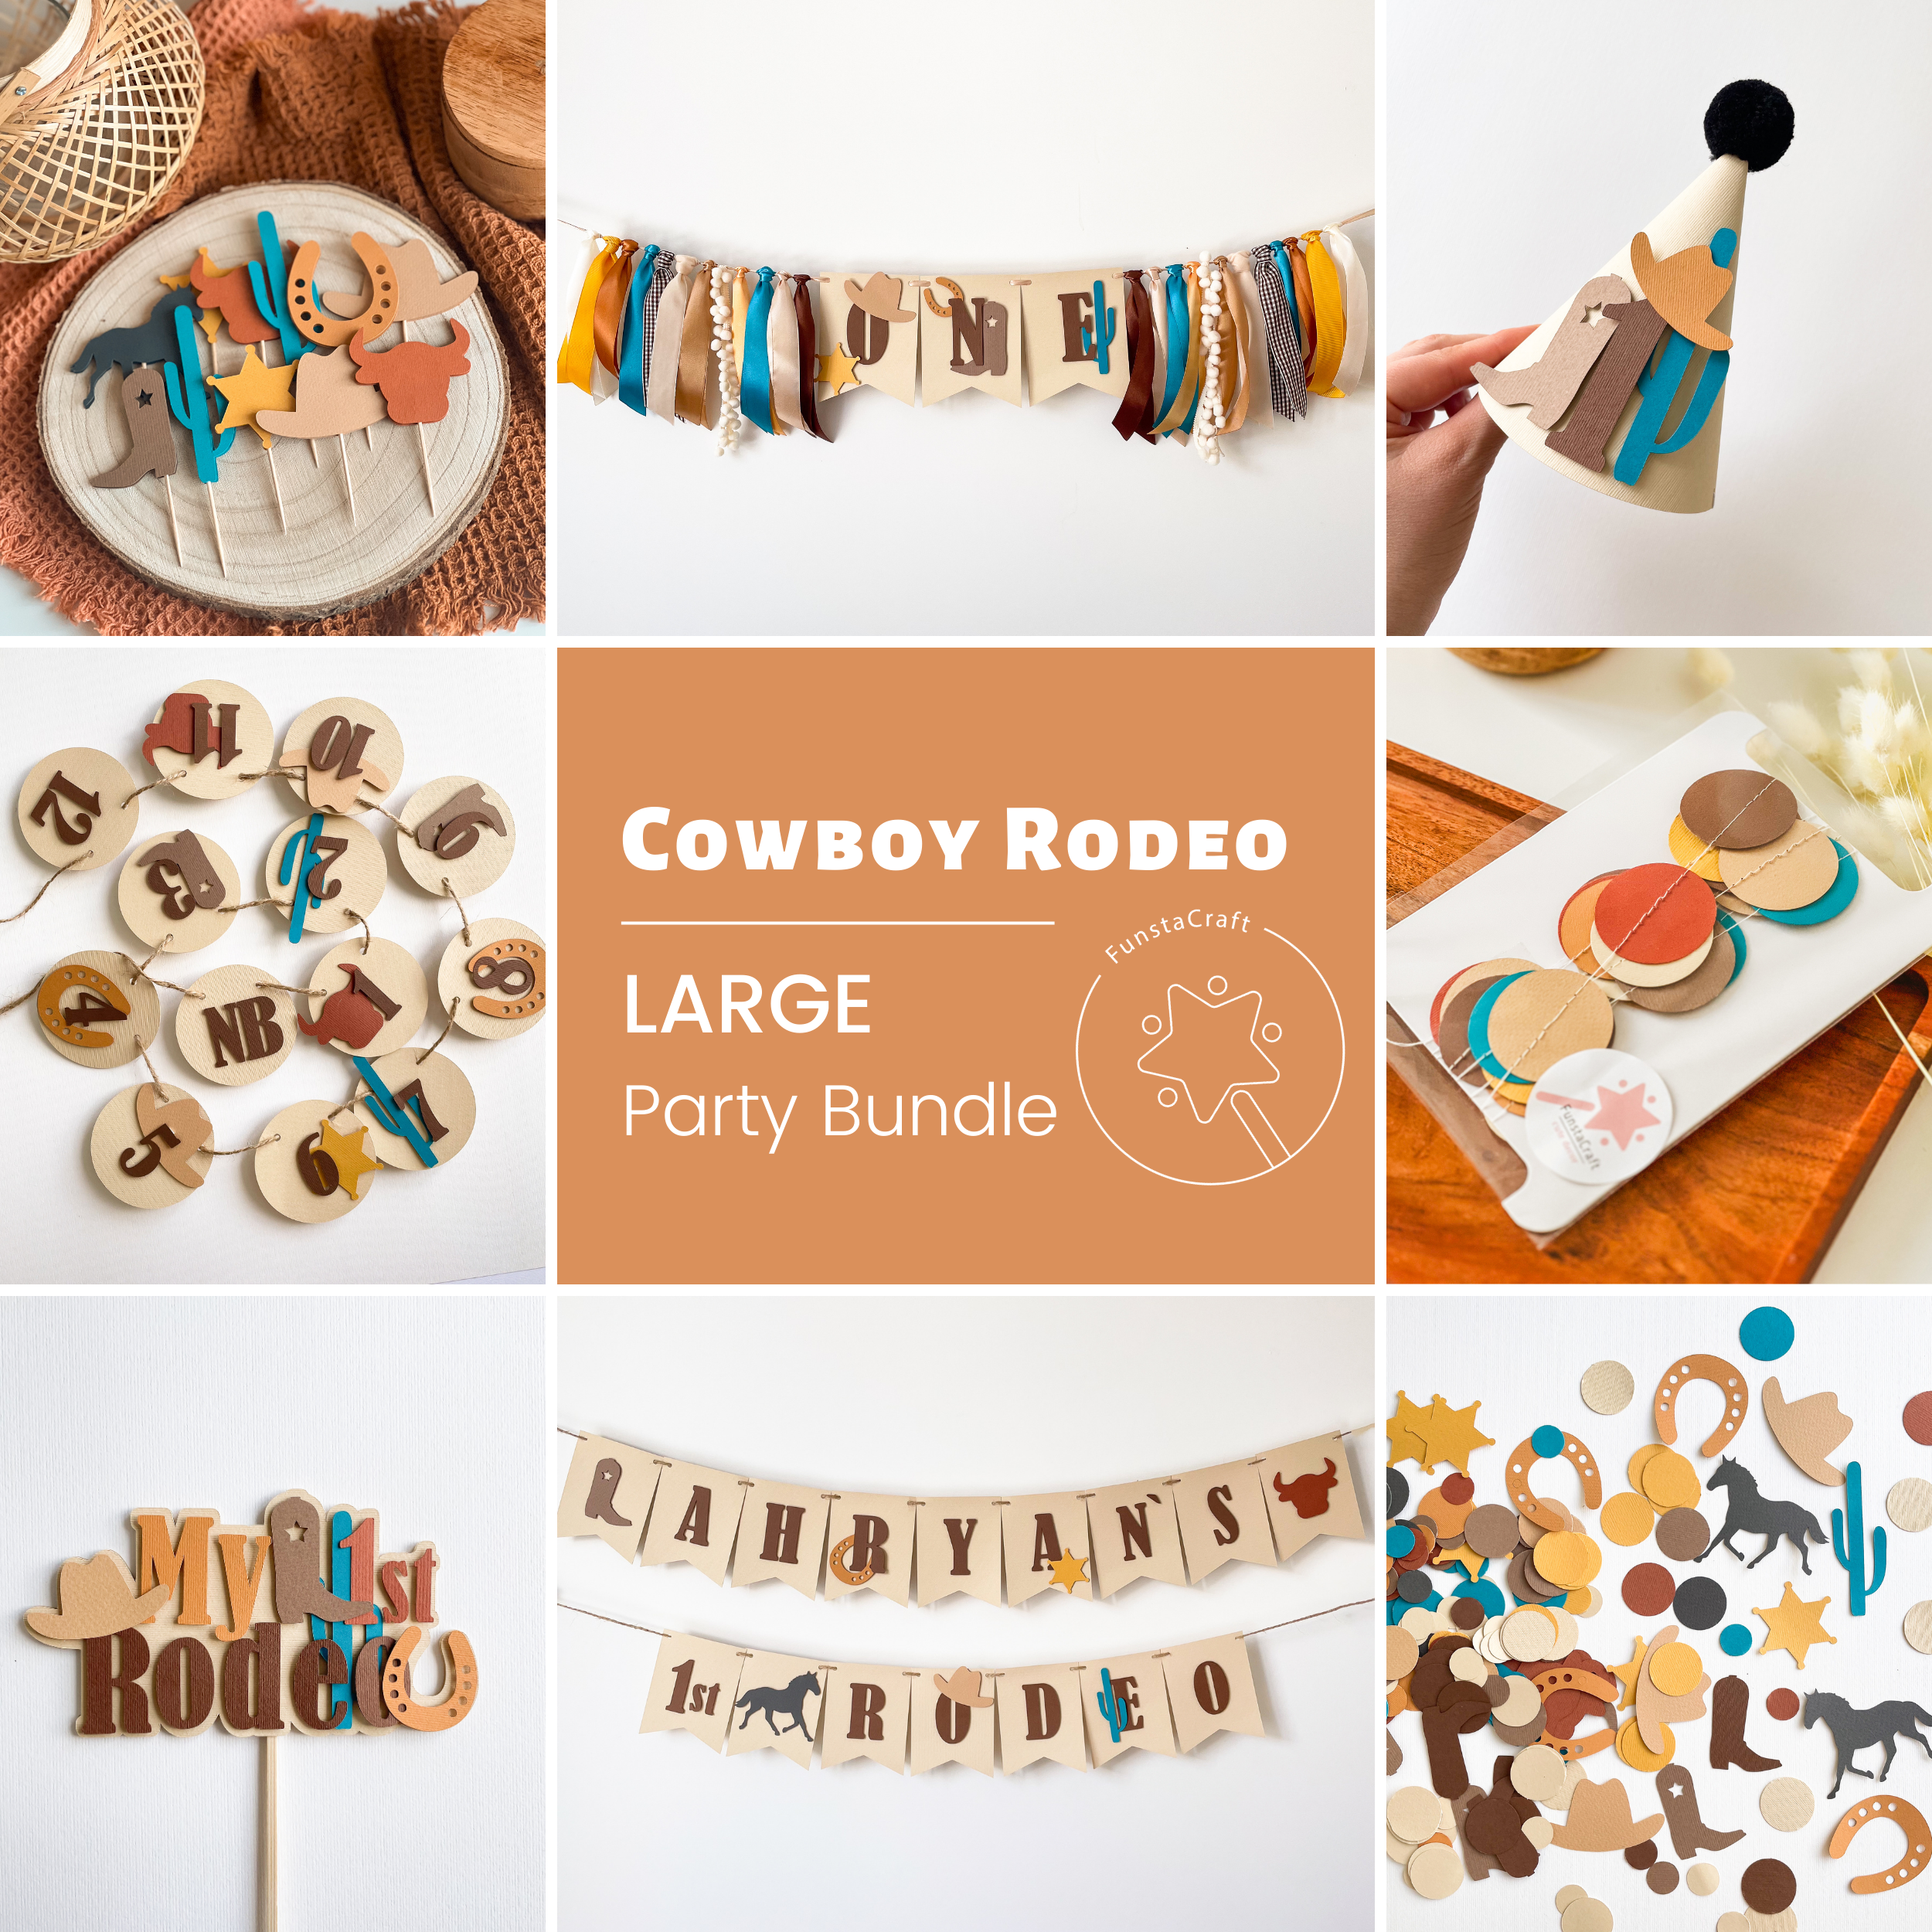 Rodeo 1st Birthday Party Bundle Cowboy Rodeo 1st Birthday Decorations My First Rodeo Birthday Party Cowboy 1st Birthday Decorations Wild West Party Decor 